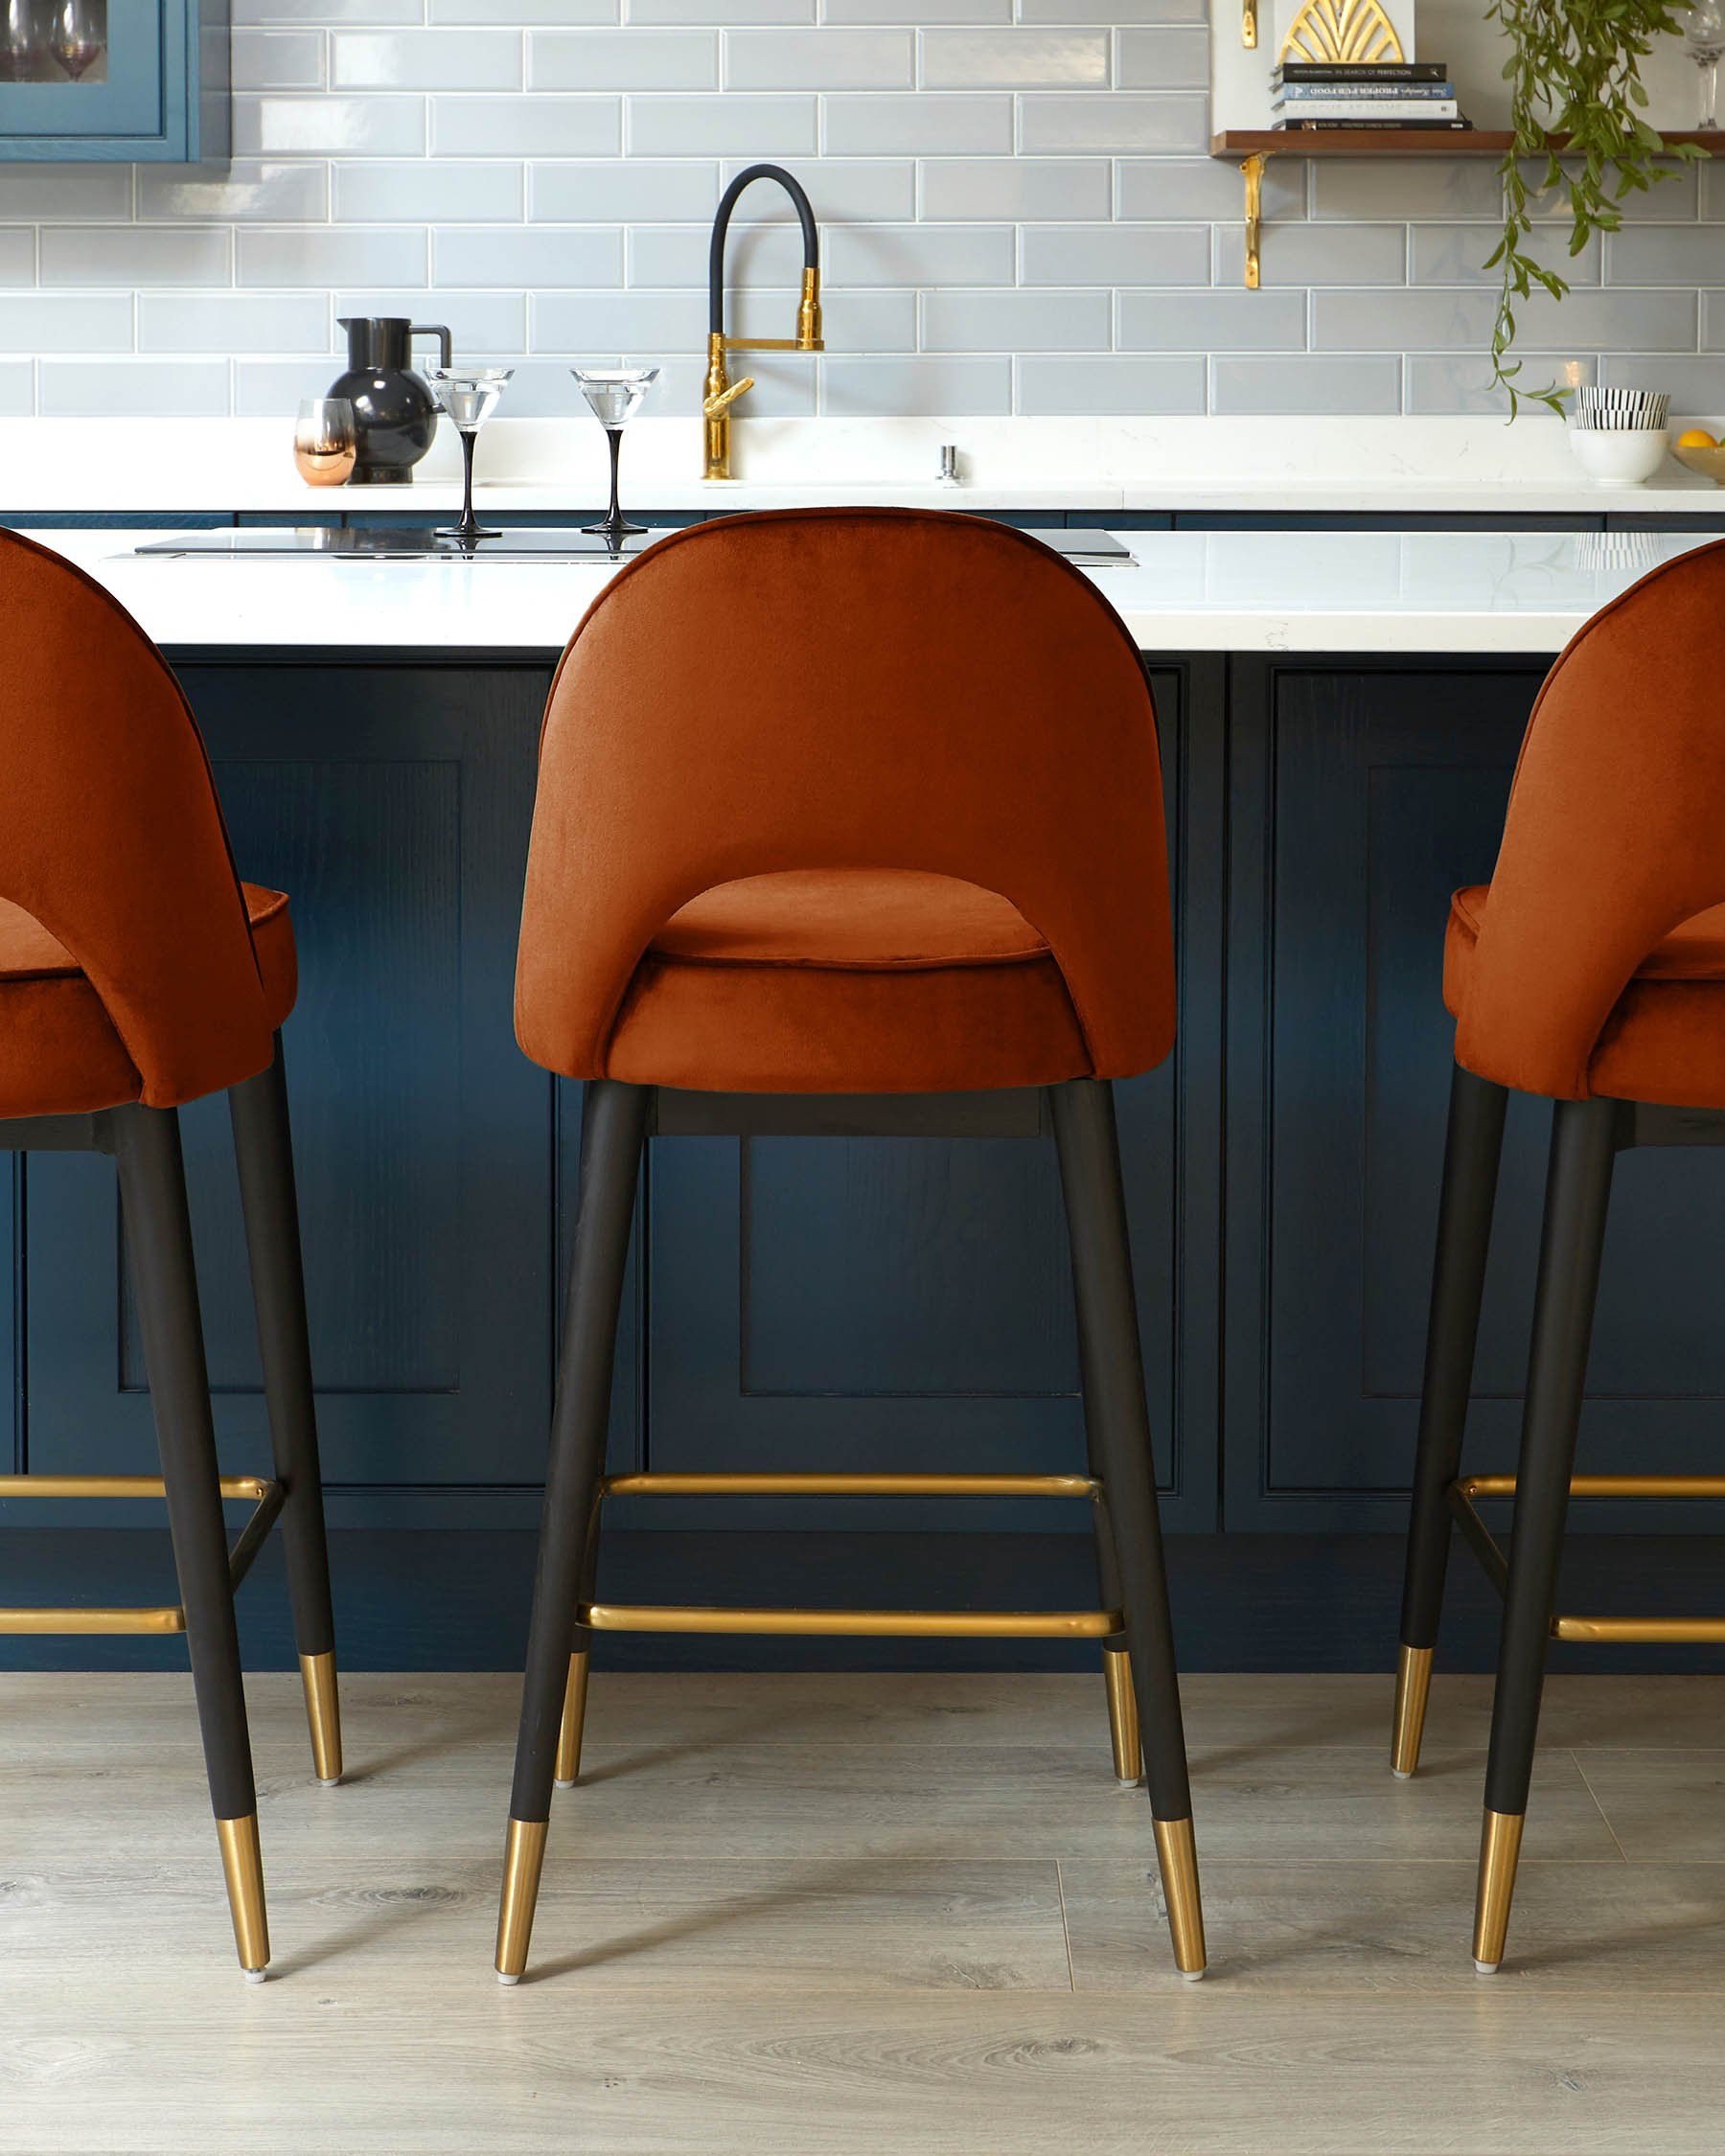 Kitchen Comfort: Enhance Your Dining Area with Kitchen Chairs